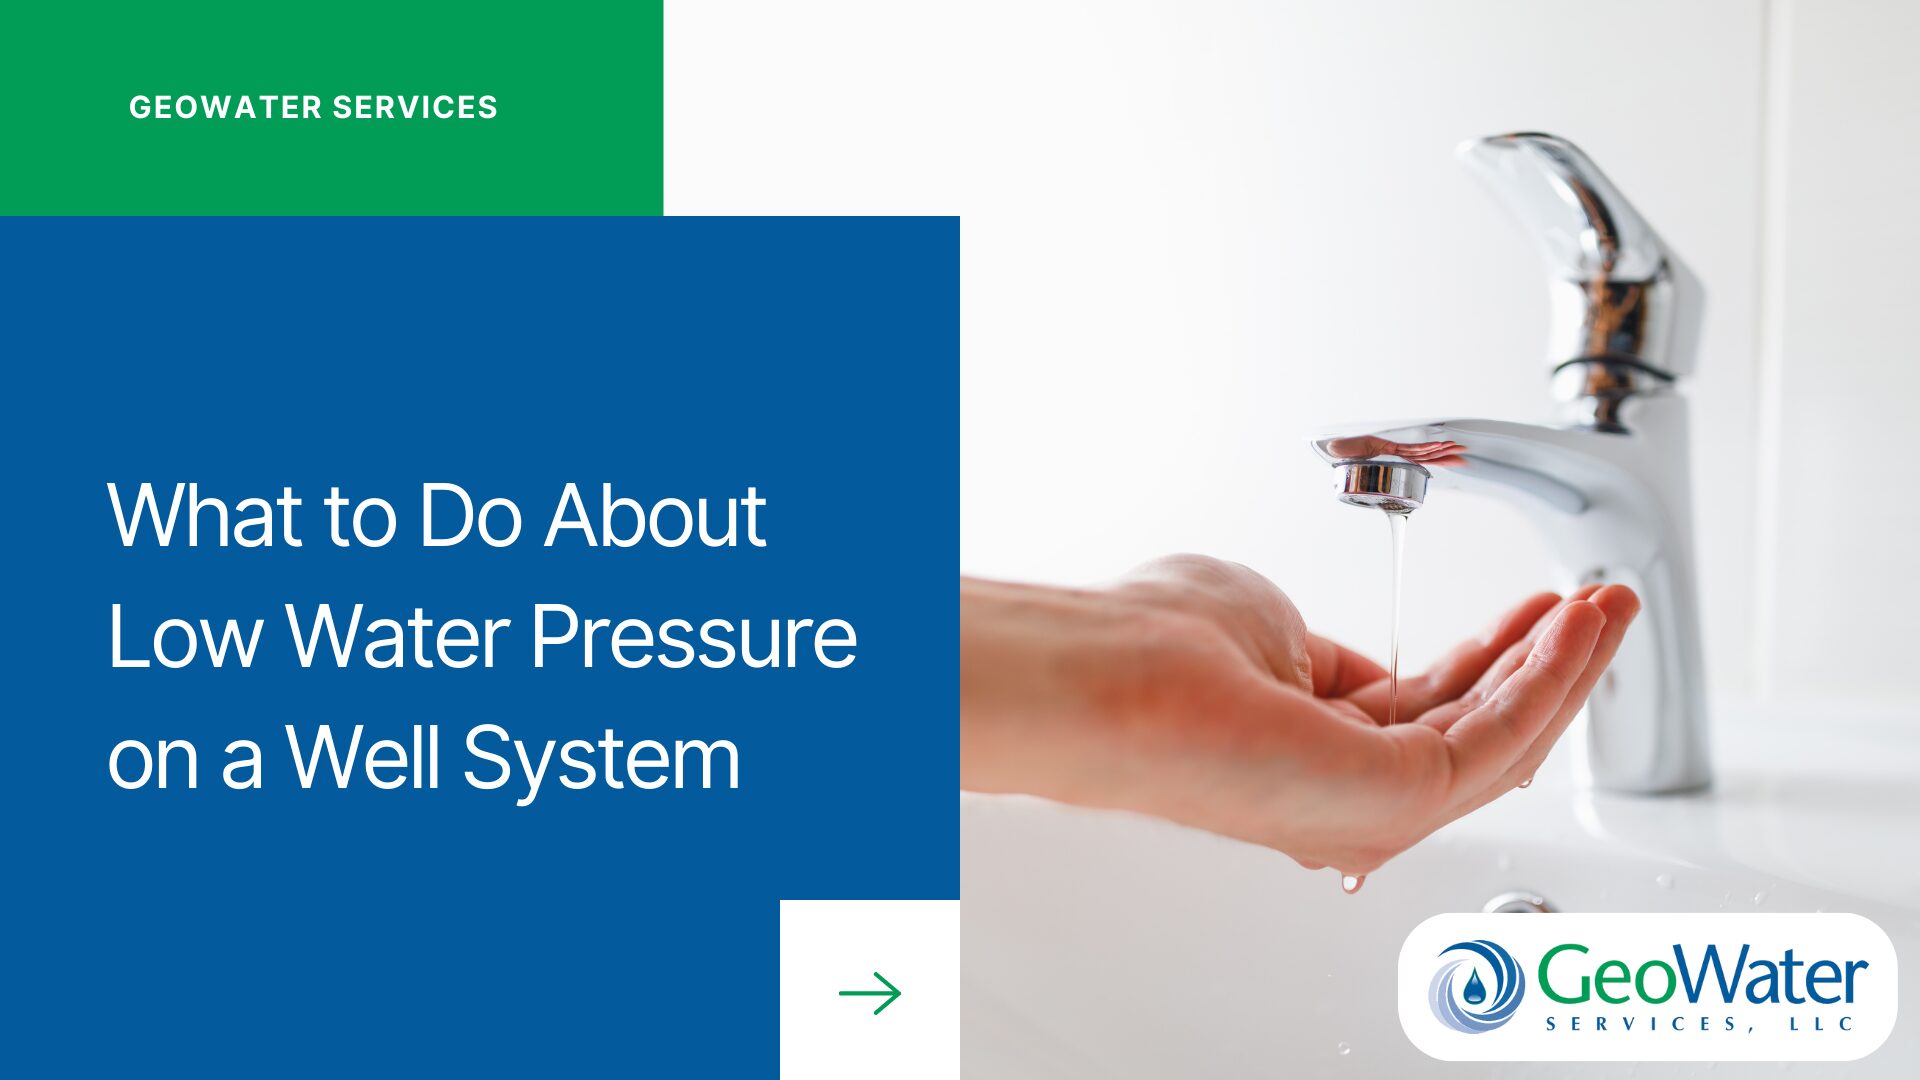 What to Do About Low Water Pressure on a Well System